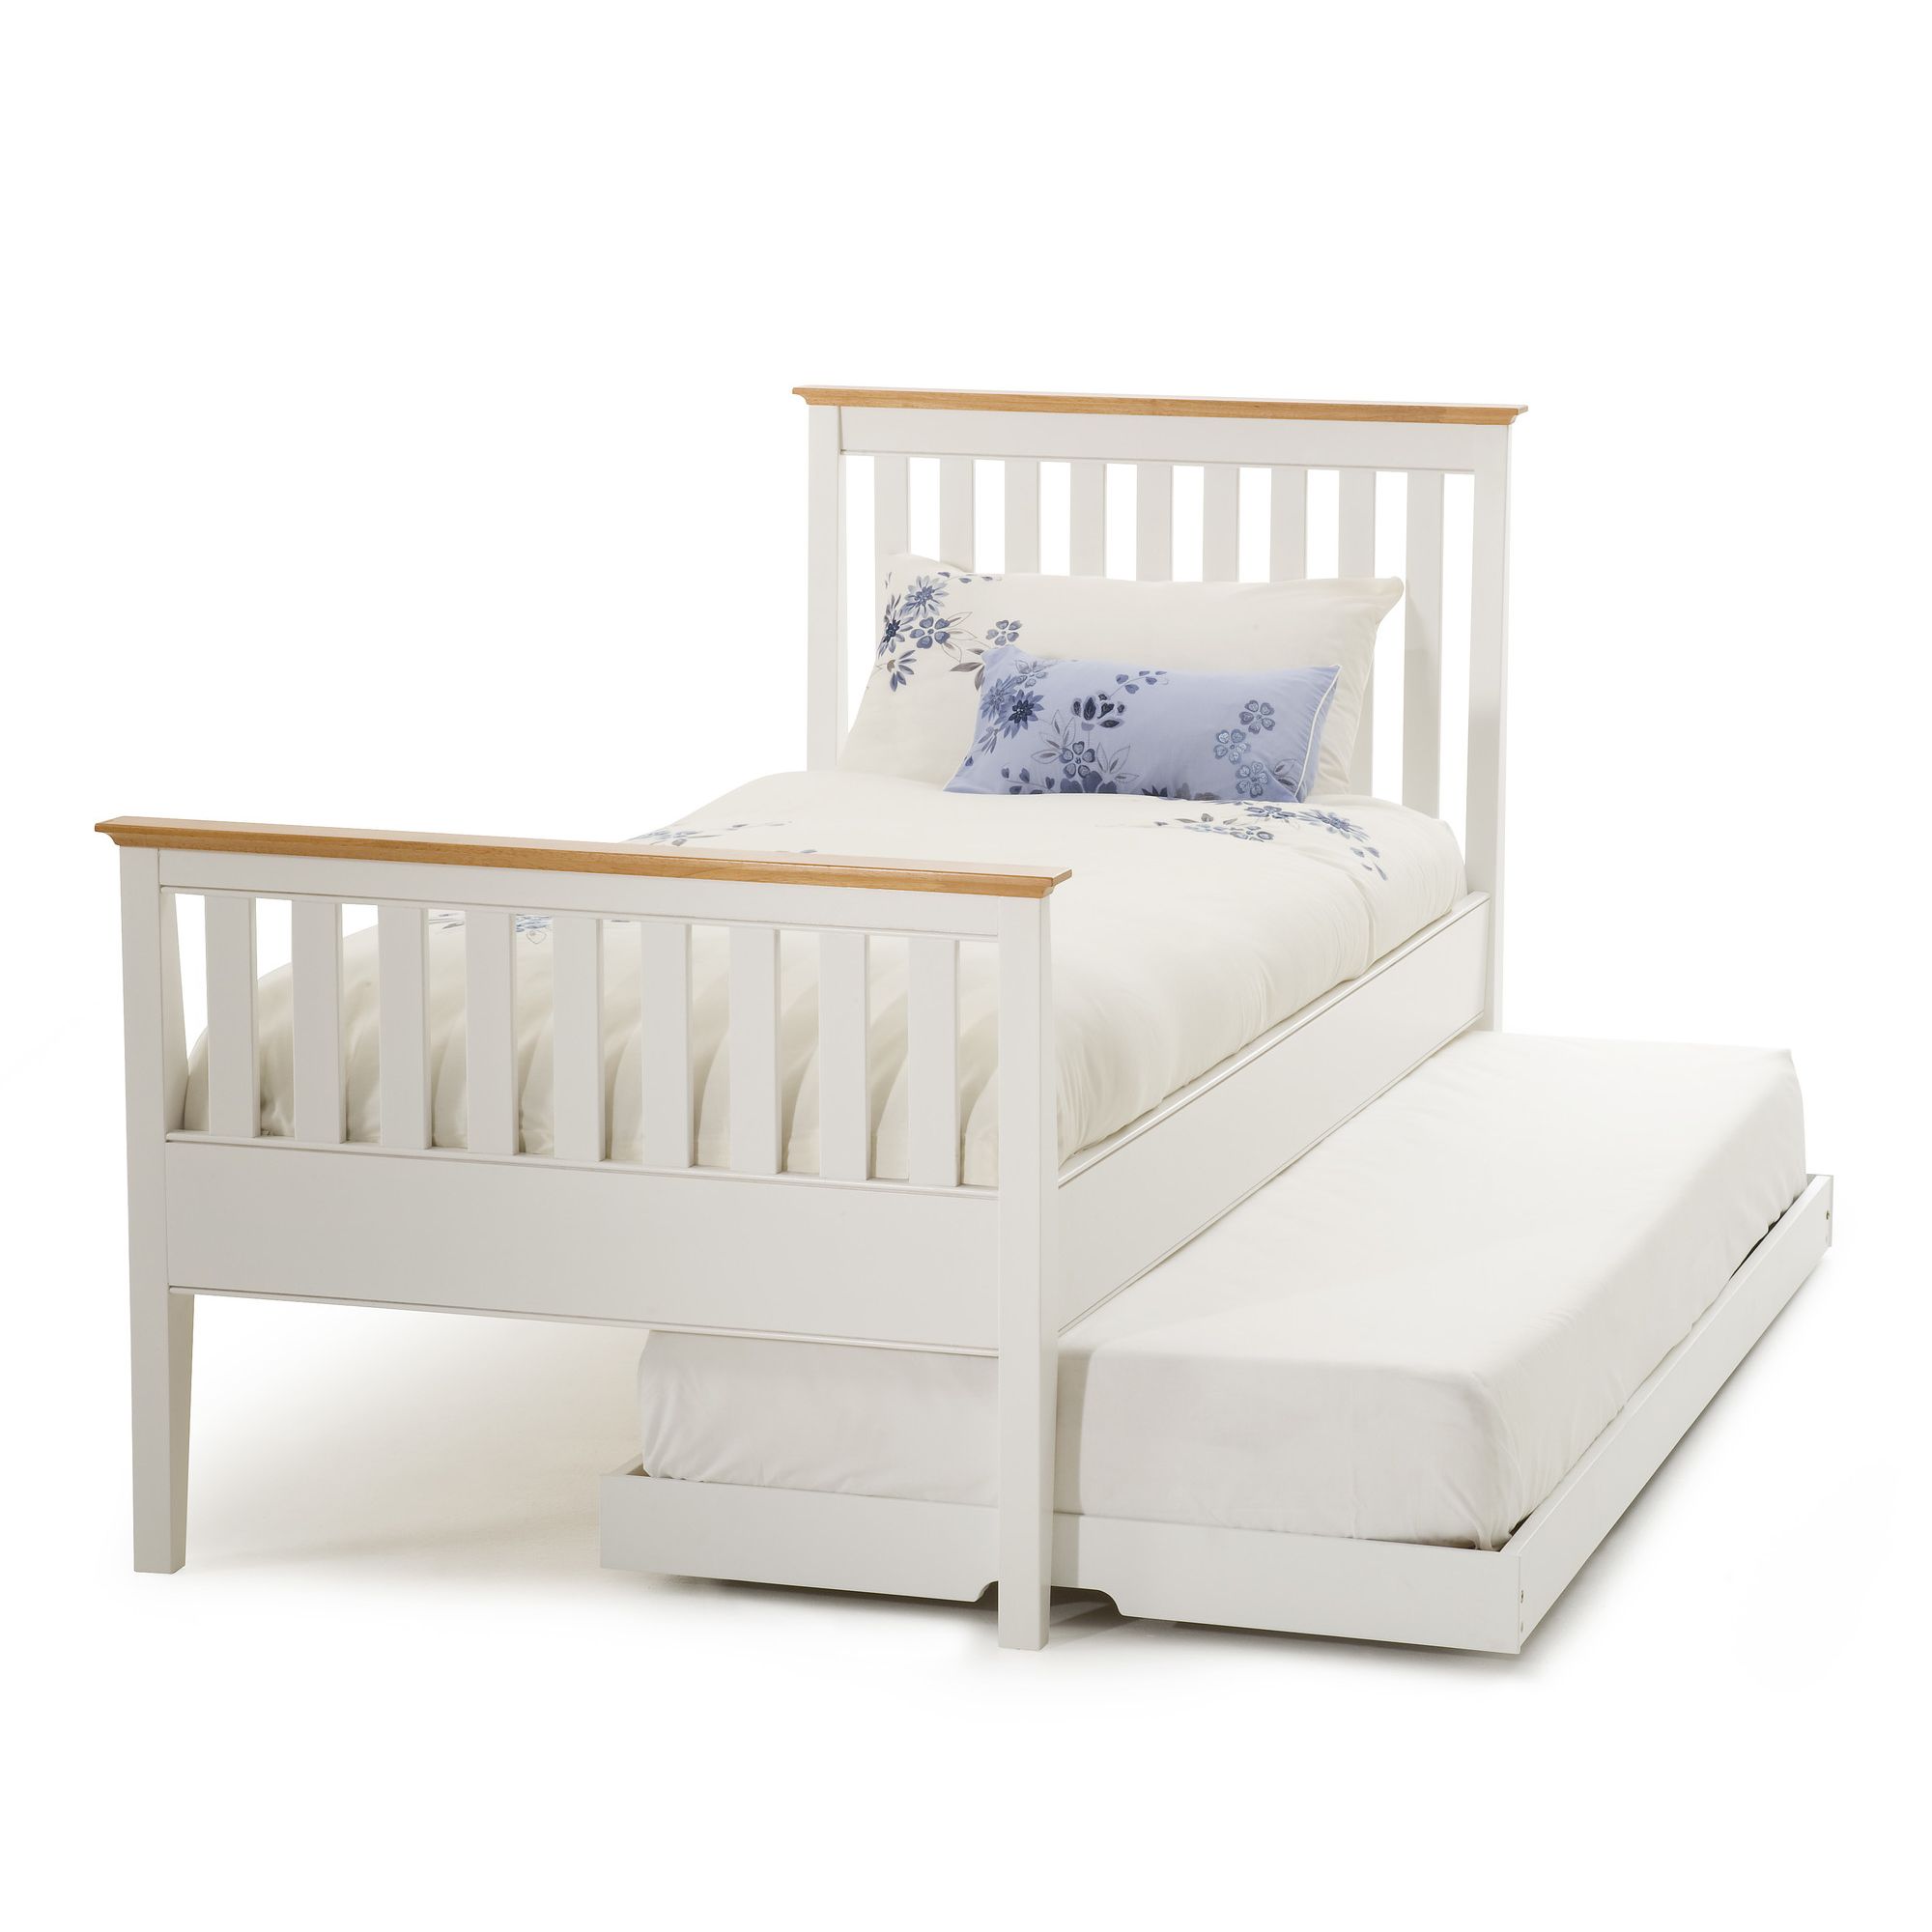 Serene Furnishings Grace Single Guest Bed with High Foot End - Golden Cherry with Opal White at Tesco Direct